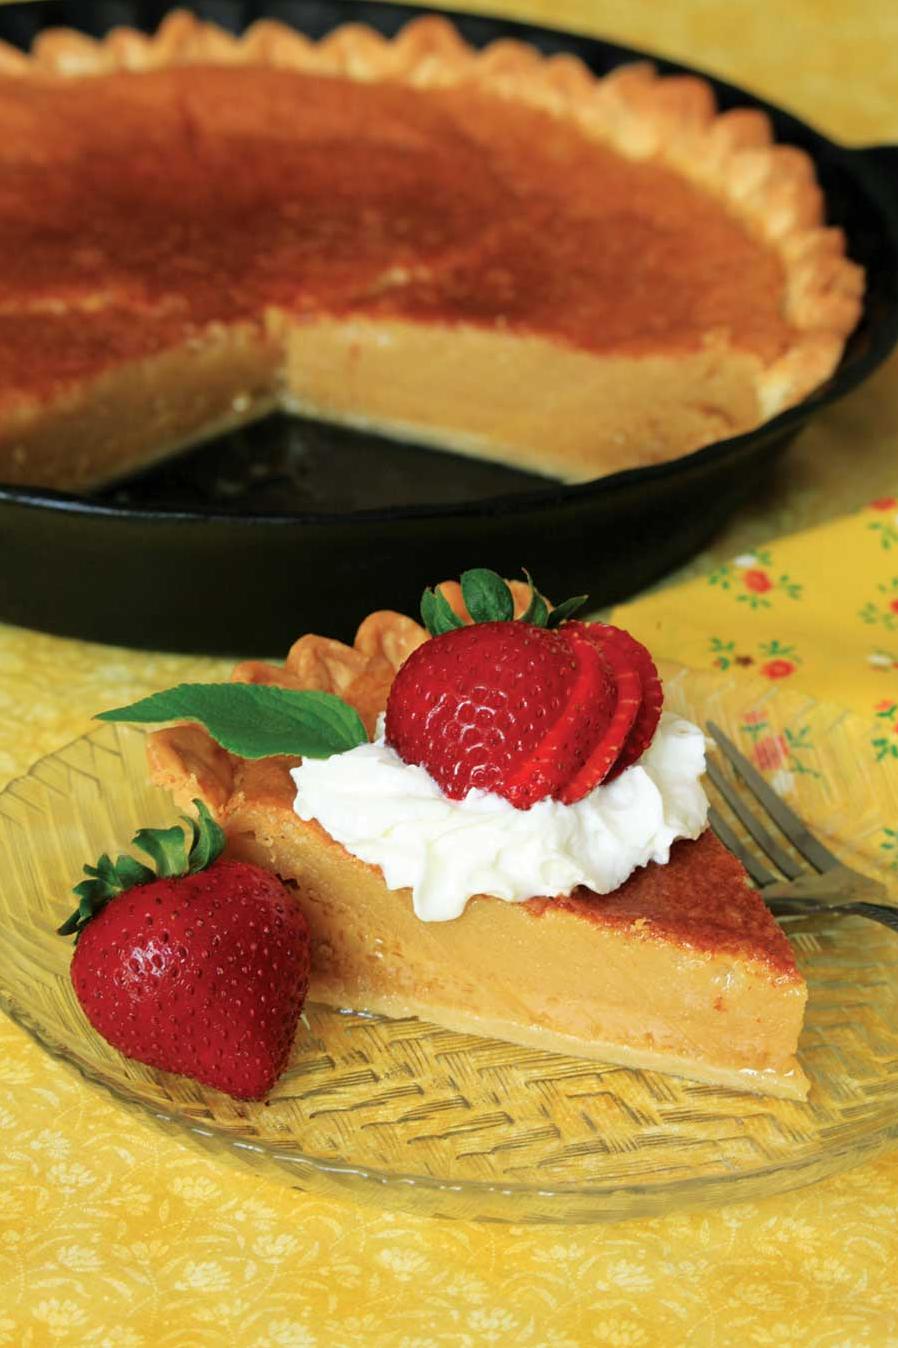  With its golden crust and gooey filling, this Butter Chess Pie Clone will quickly become a family favorite.